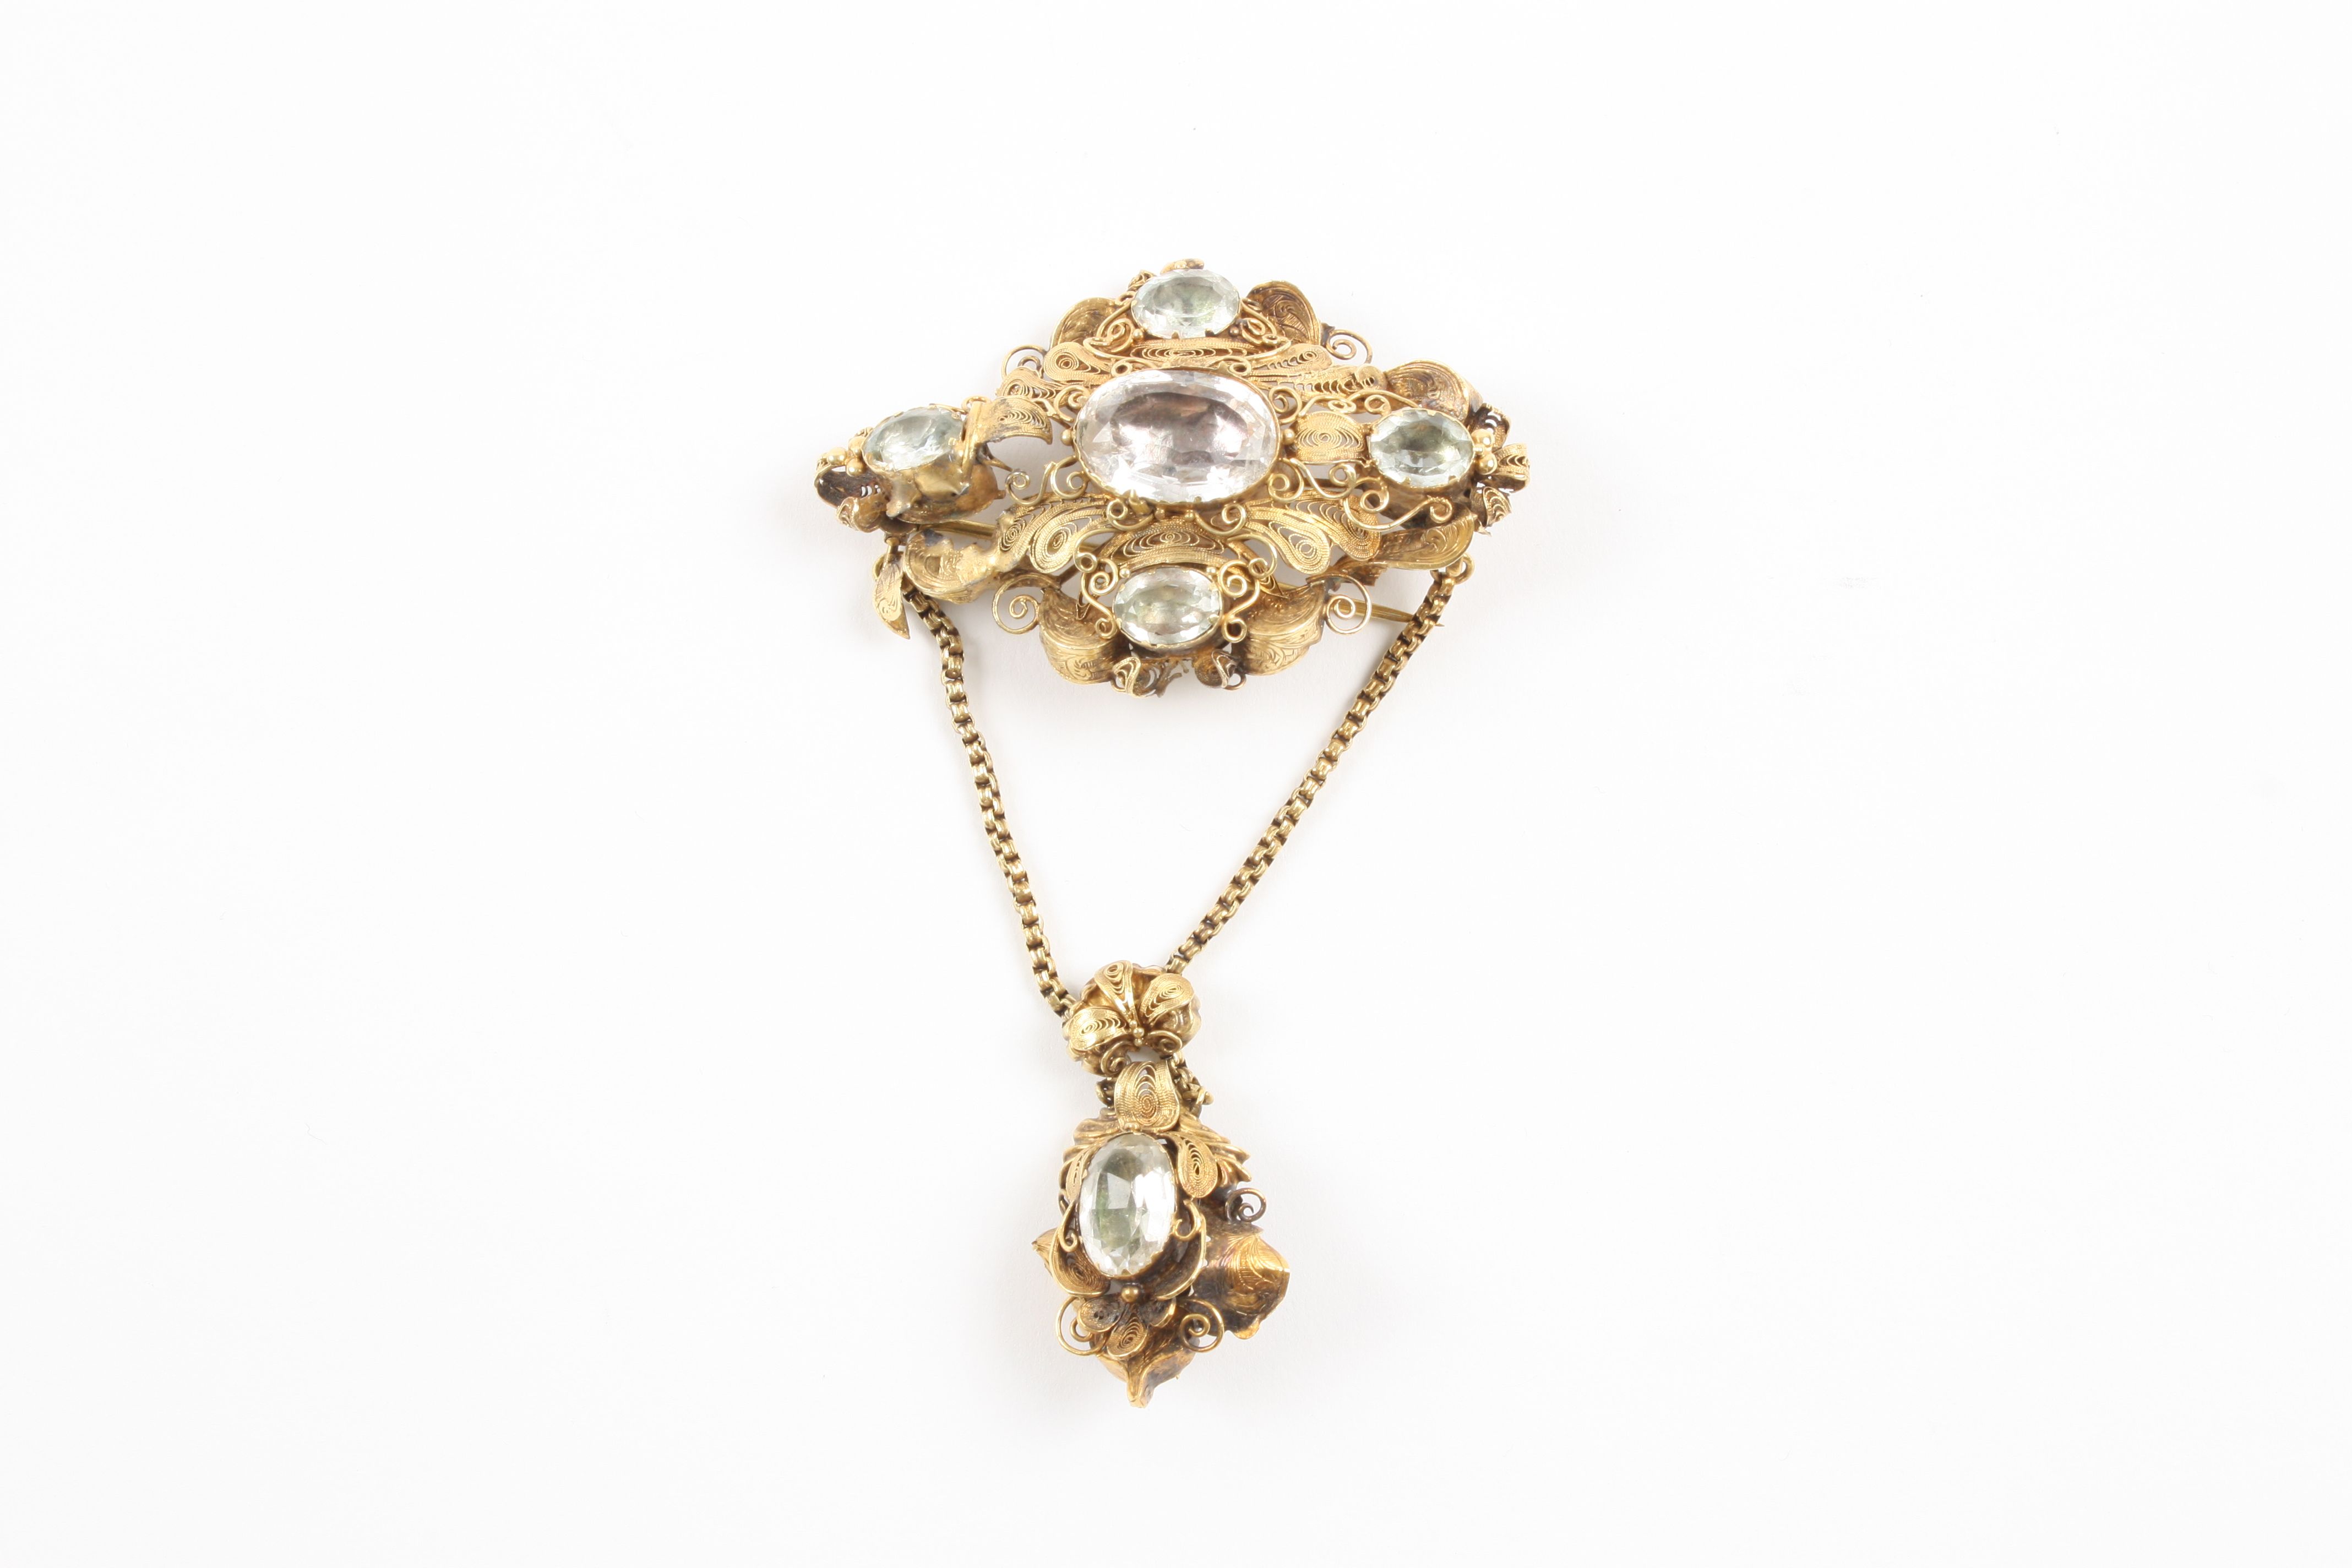 A Victorian yellow metal filigree brooch set with faceted oval stones, with further stone